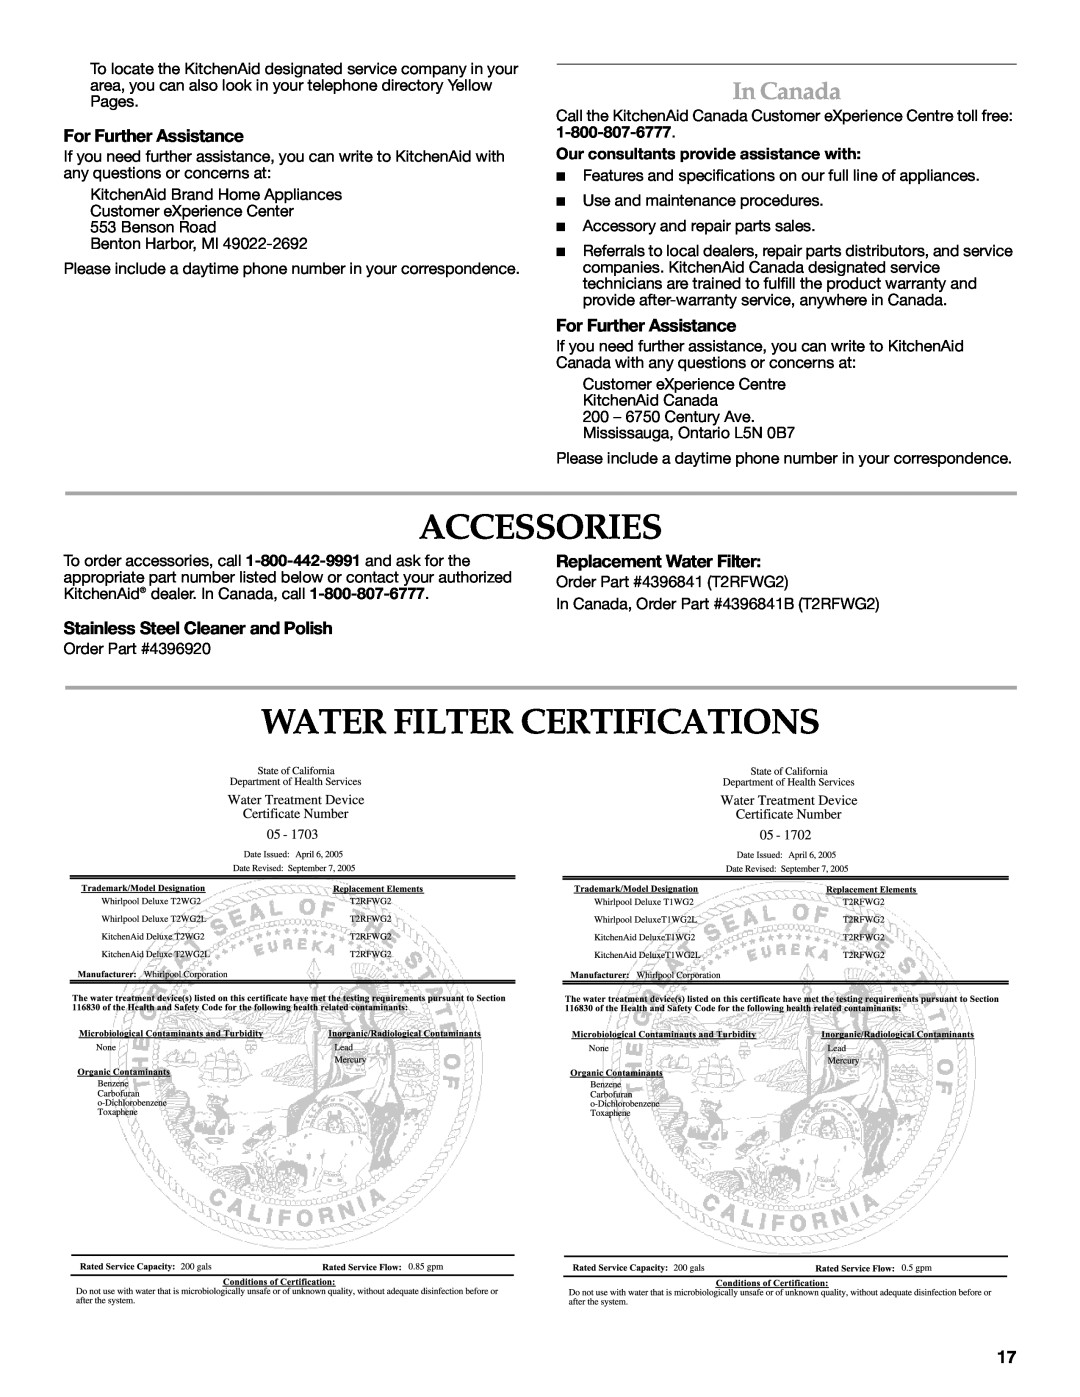 KitchenAid W10303989A, KSSC48QVS manual Accessories, Water Filter Certifications, In Canada, For Further Assistance 